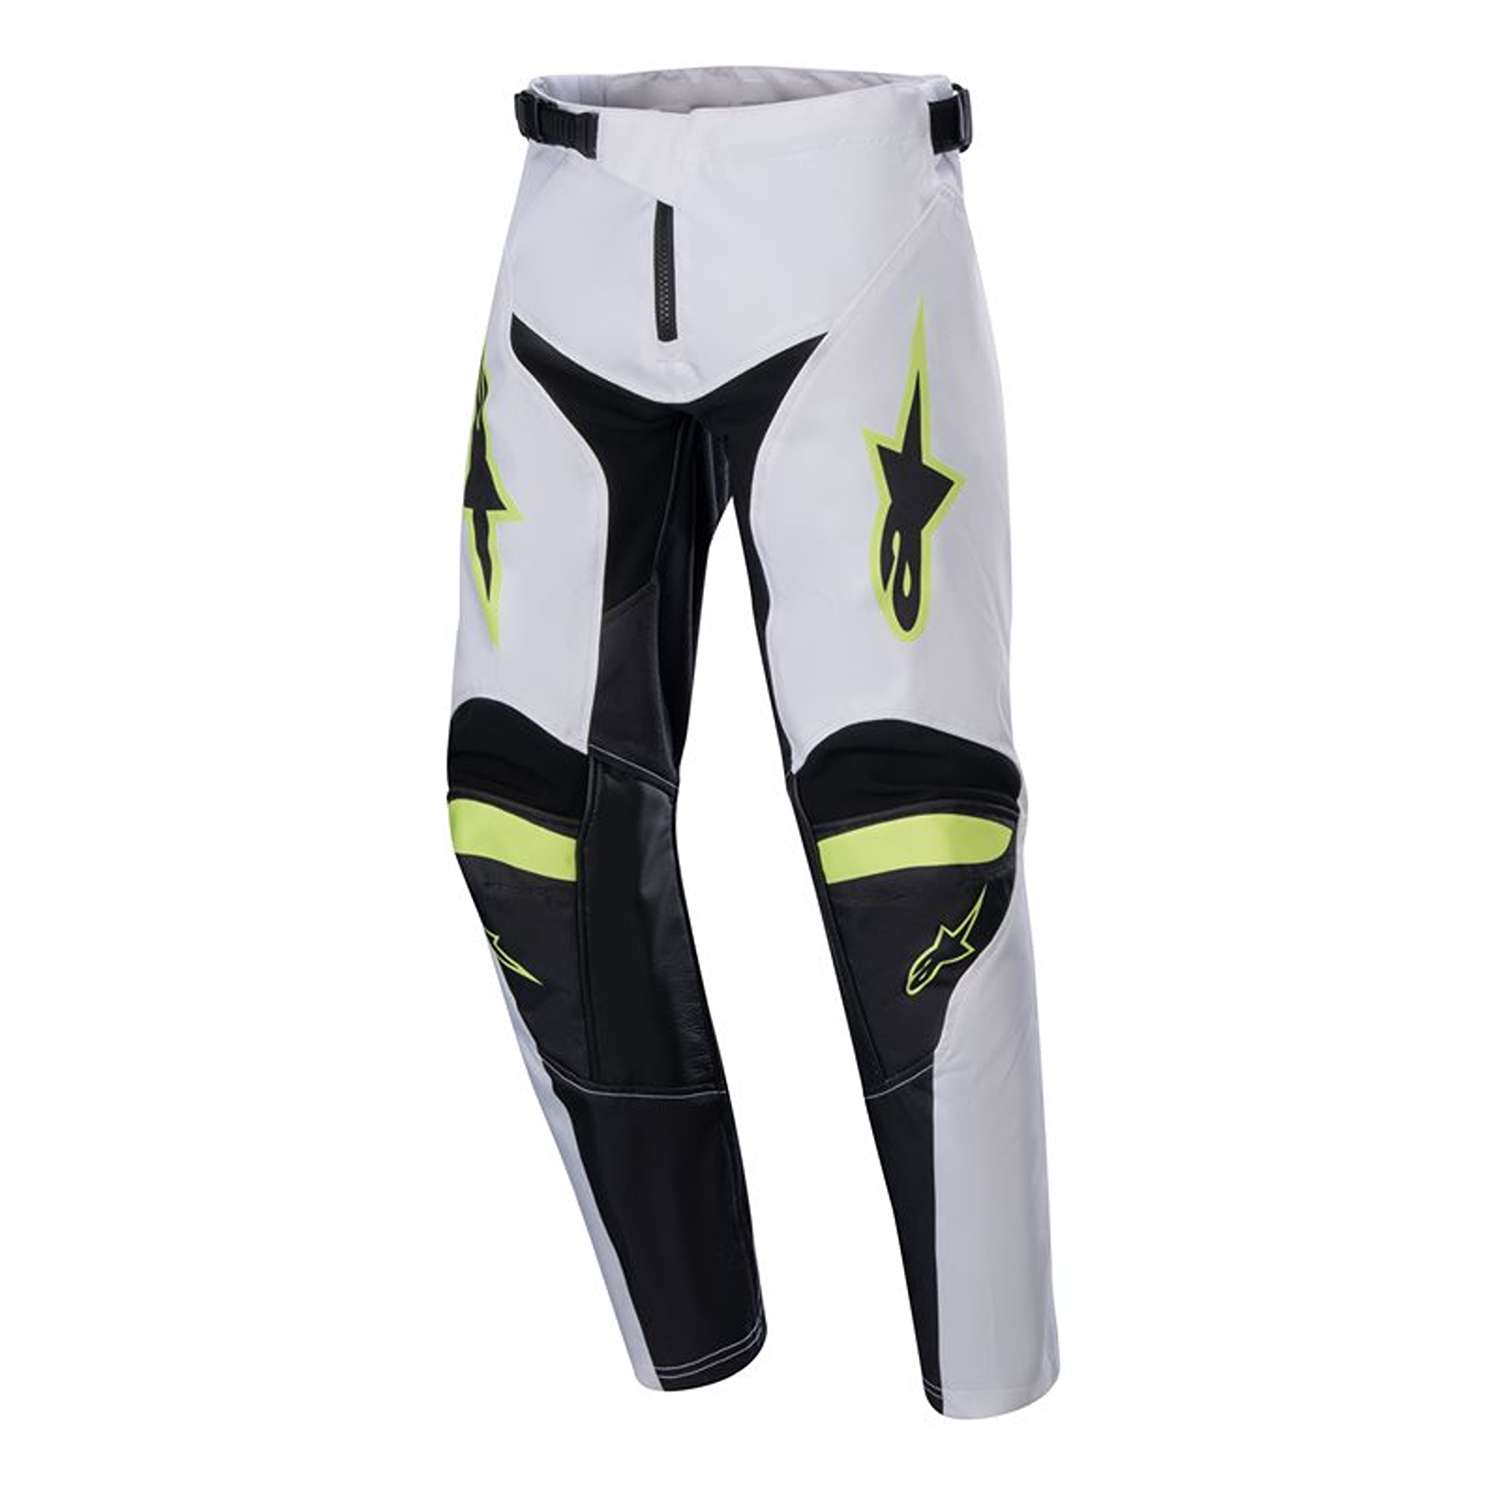 Image of Alpinestars Youth Racer Lucent Pants White Neon Red Yellow Fluo Size 22 EN